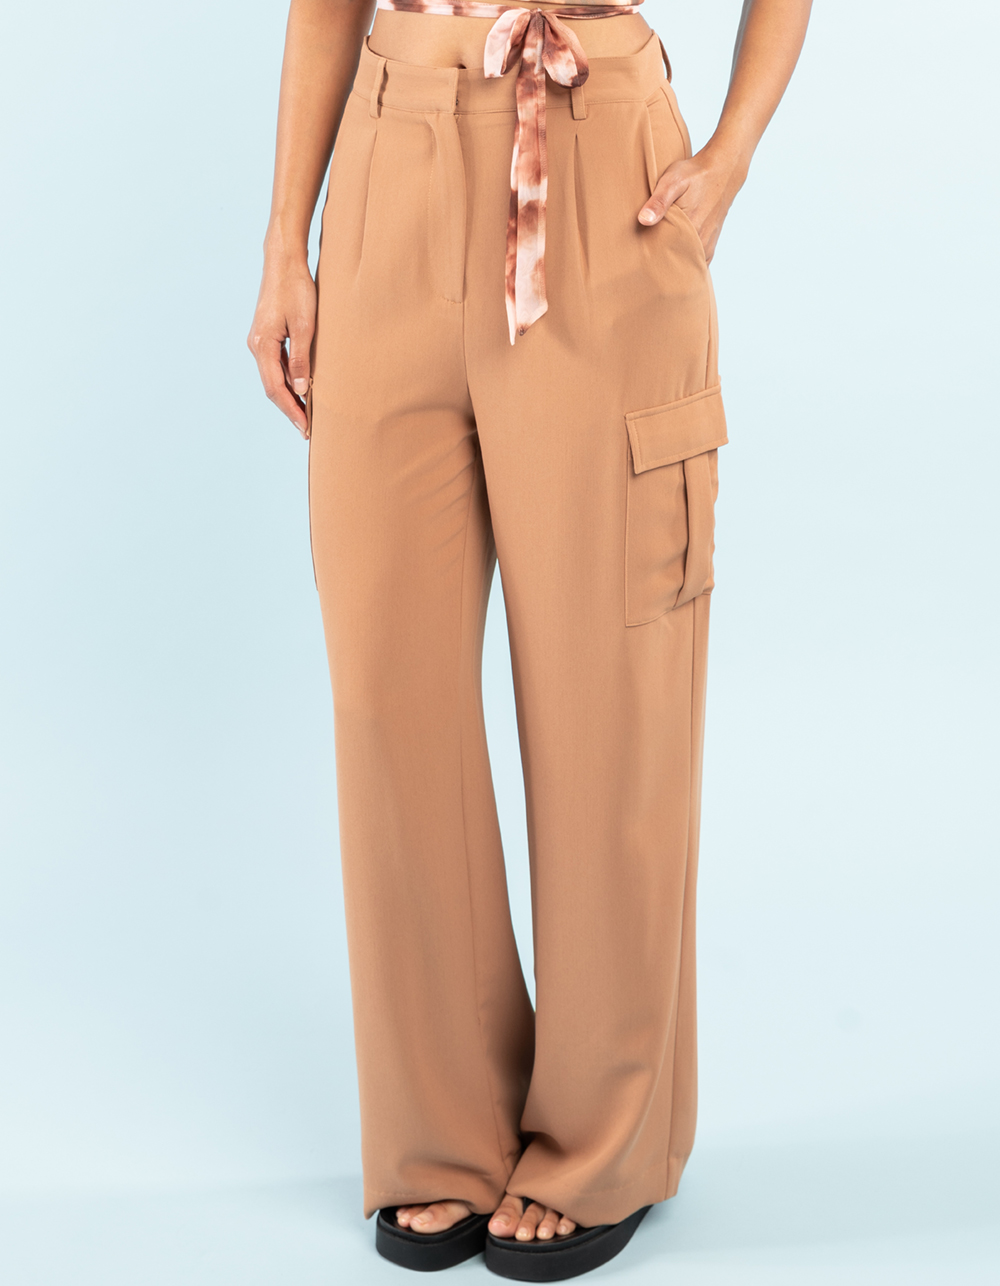 WEST OF MELROSE Womens Cargo Wide Leg Pants - TOBACCO | Tillys